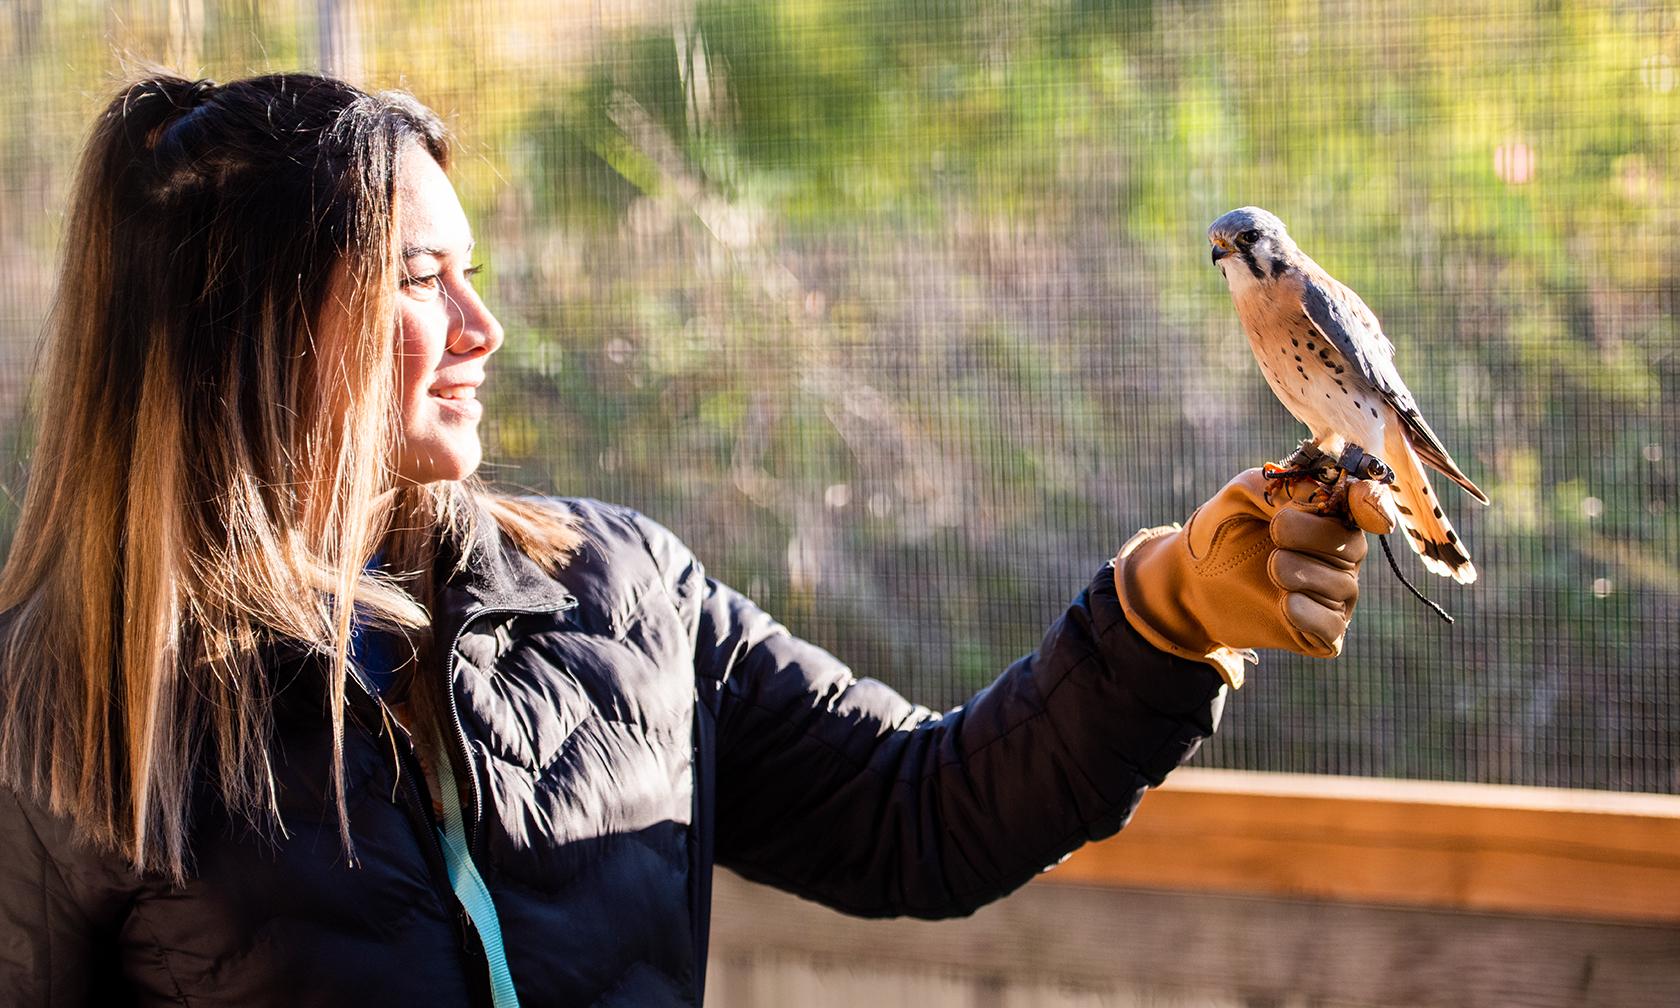 Nature Reach worker Gizelle Sisson with an American kestrel